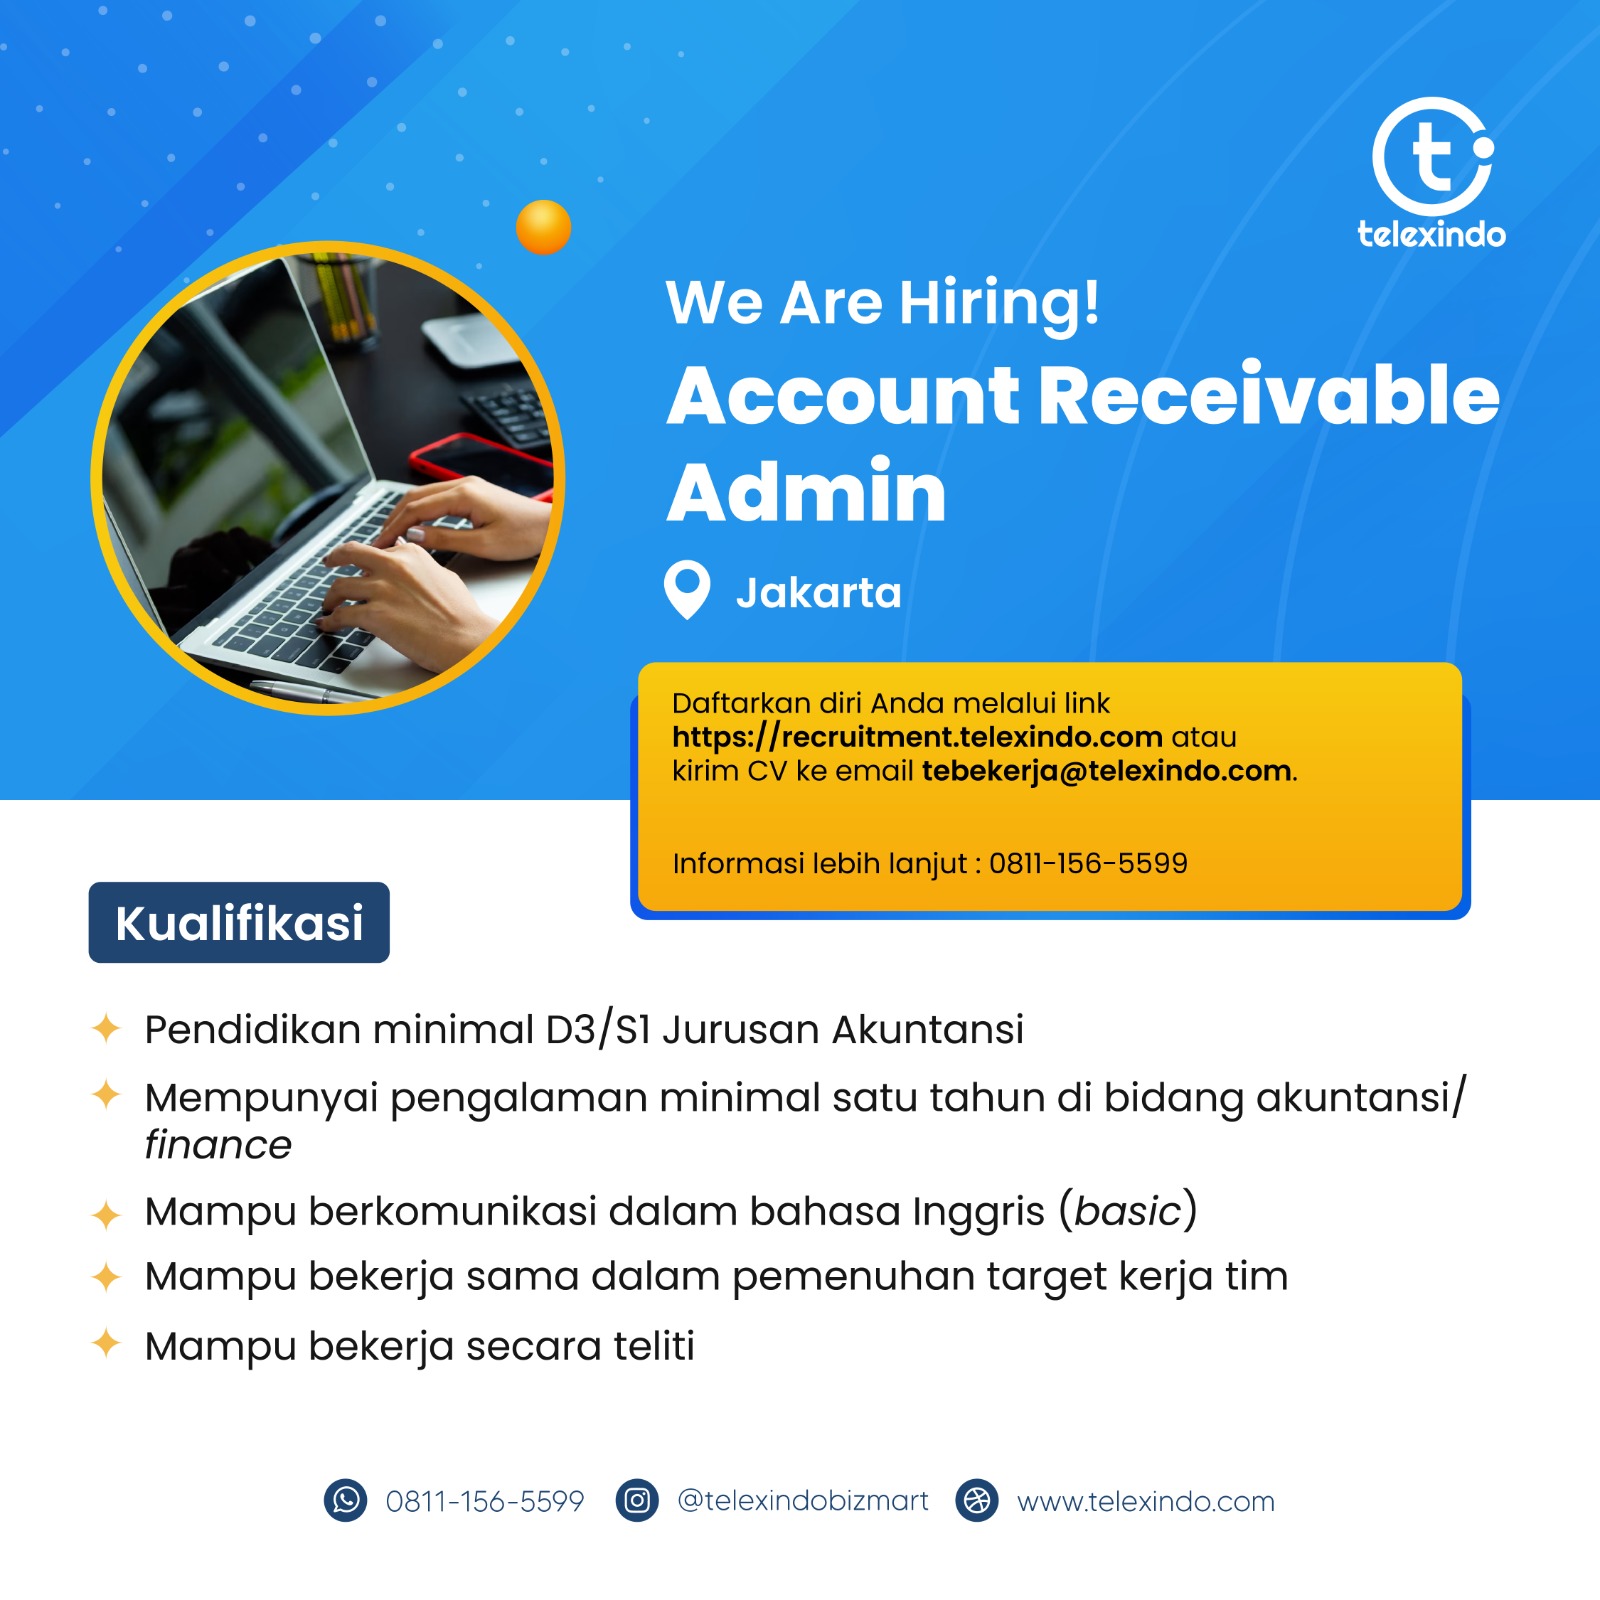 ACCOUNT RECEIVABLE STAFF